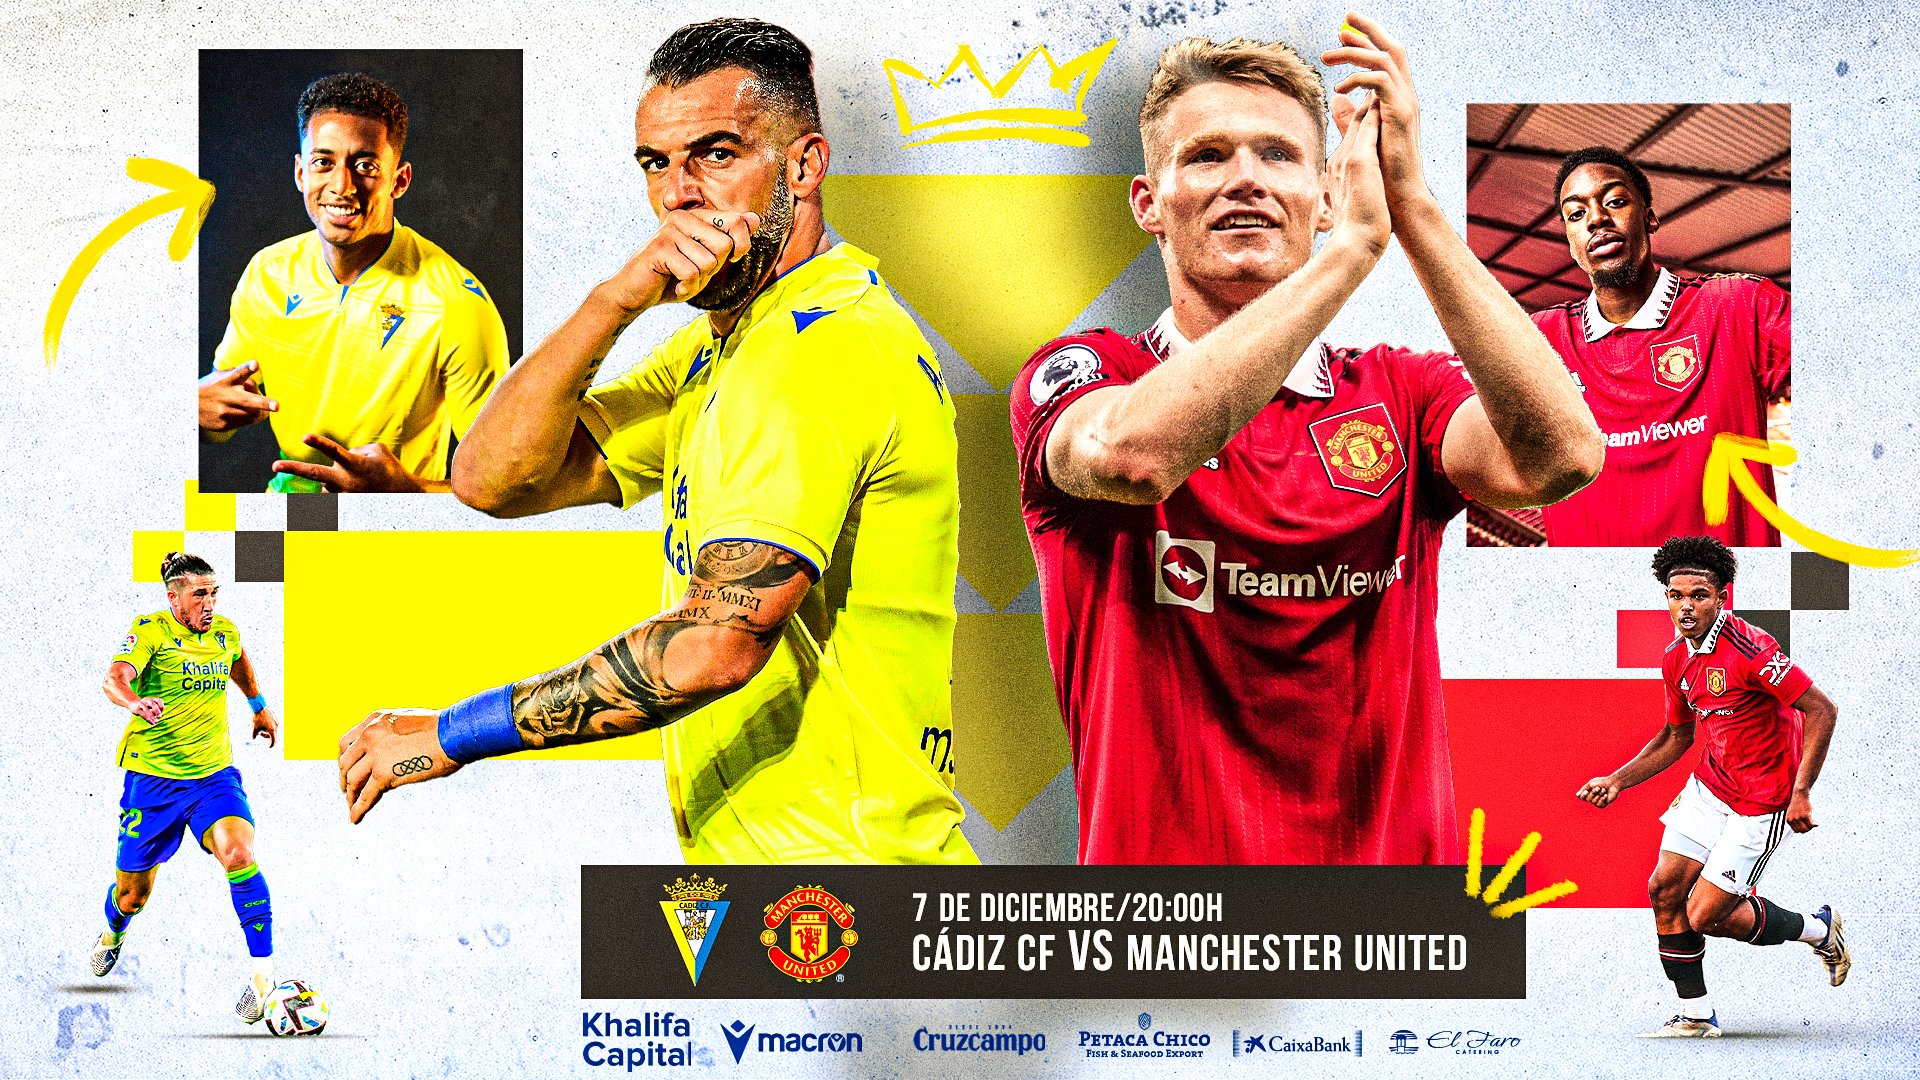 Cádiz CF 🇬🇧🇺🇸 on Twitter: "𝗕𝗜𝗚 𝗚𝗔𝗠𝗘 𝗖𝗢𝗠𝗜𝗡𝗚!!!! 🔥 We are  pleased to announce that the Red Devils are coming to Cádiz! 💛🔴 Cádiz CF  and @ManUtd will play a friendly at